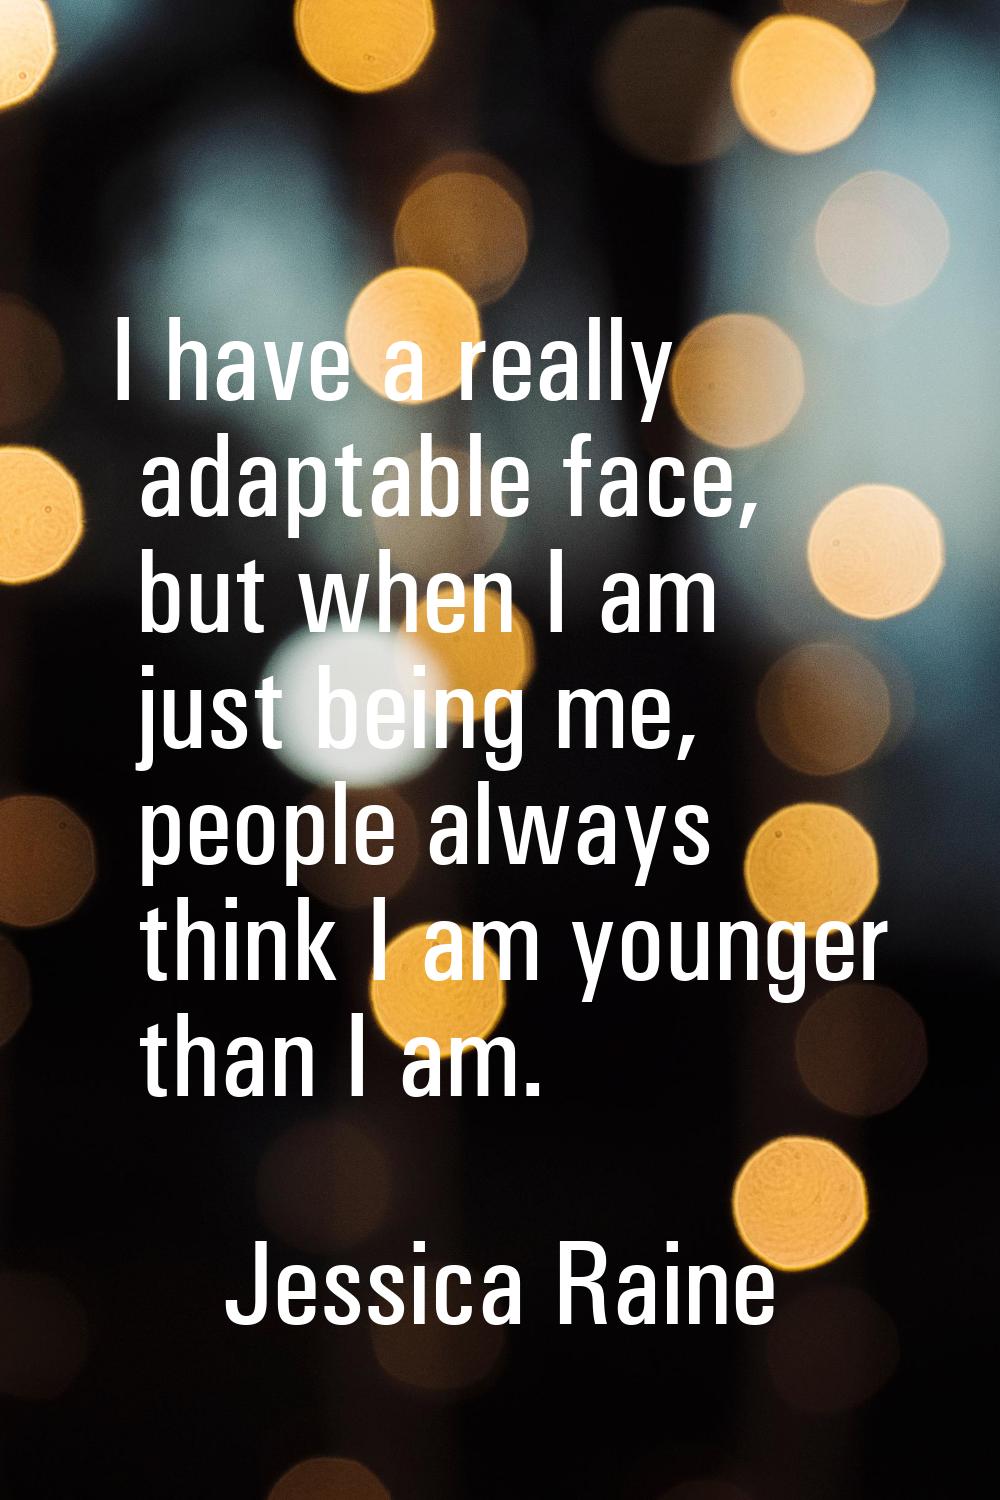 I have a really adaptable face, but when I am just being me, people always think I am younger than 